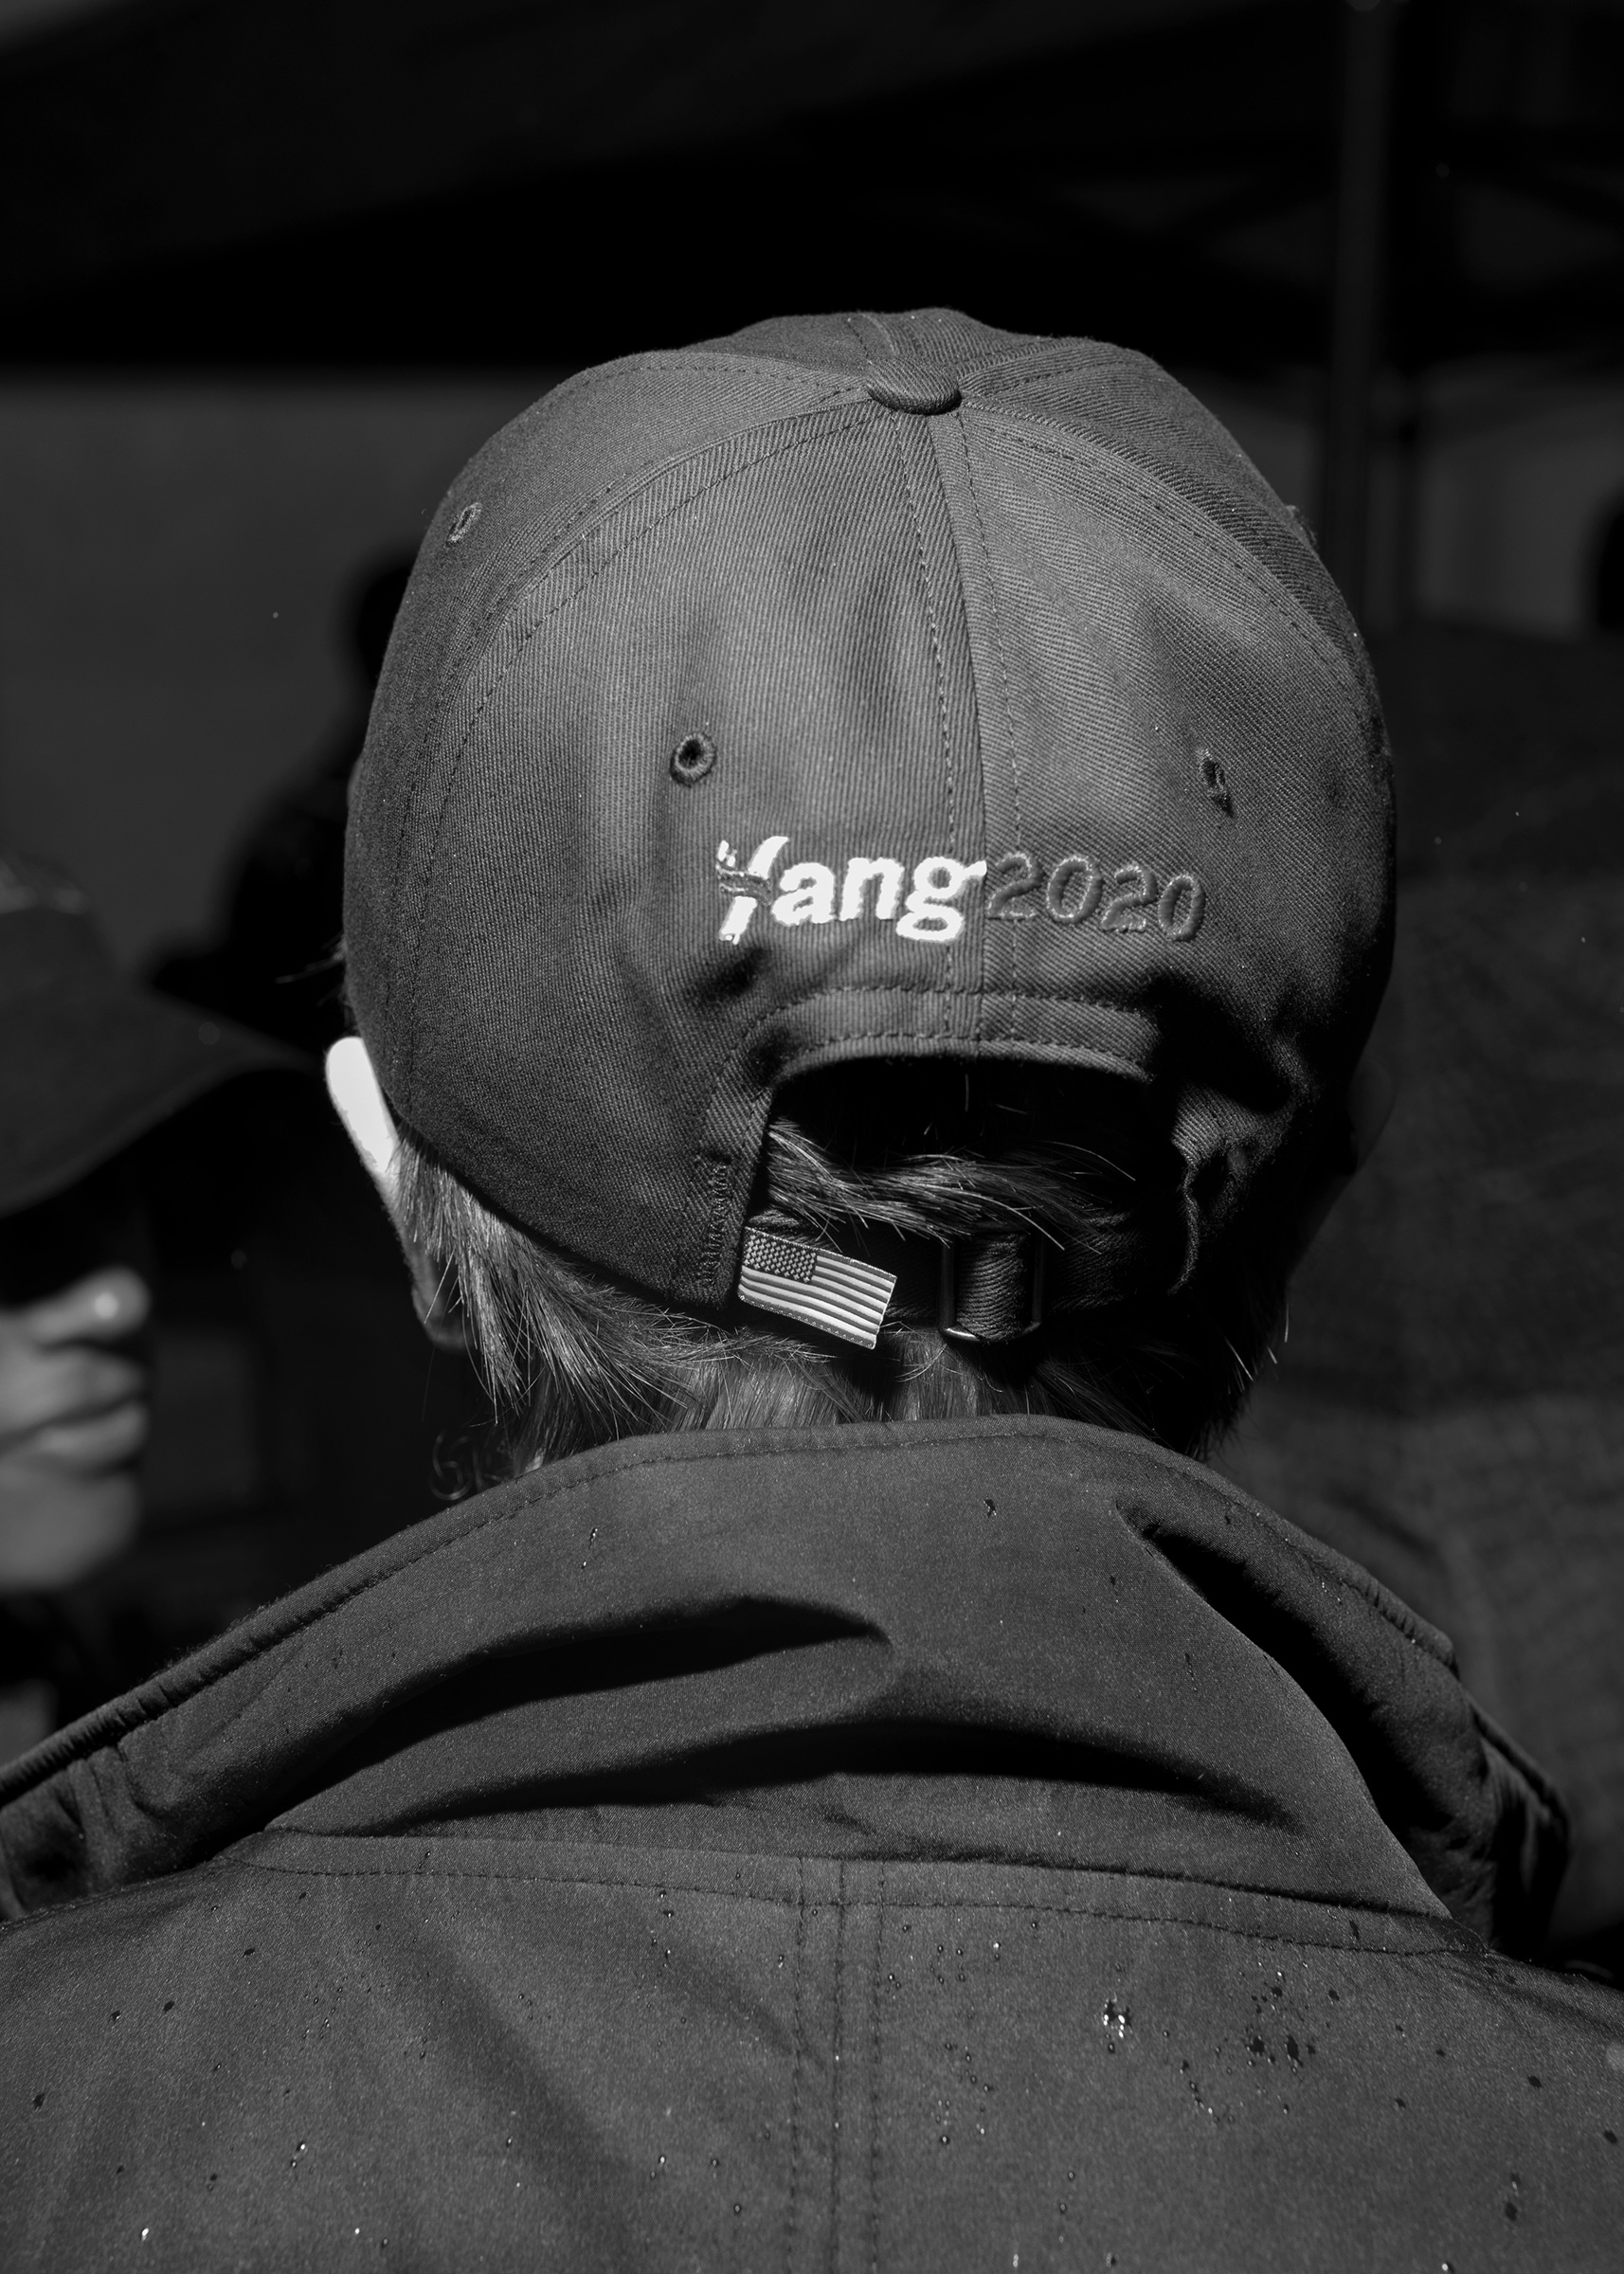 An Andrew Yang supporter at a rally in Washington Square Park, New York, May 14, 2019. (Philip Montgomery for TIME)